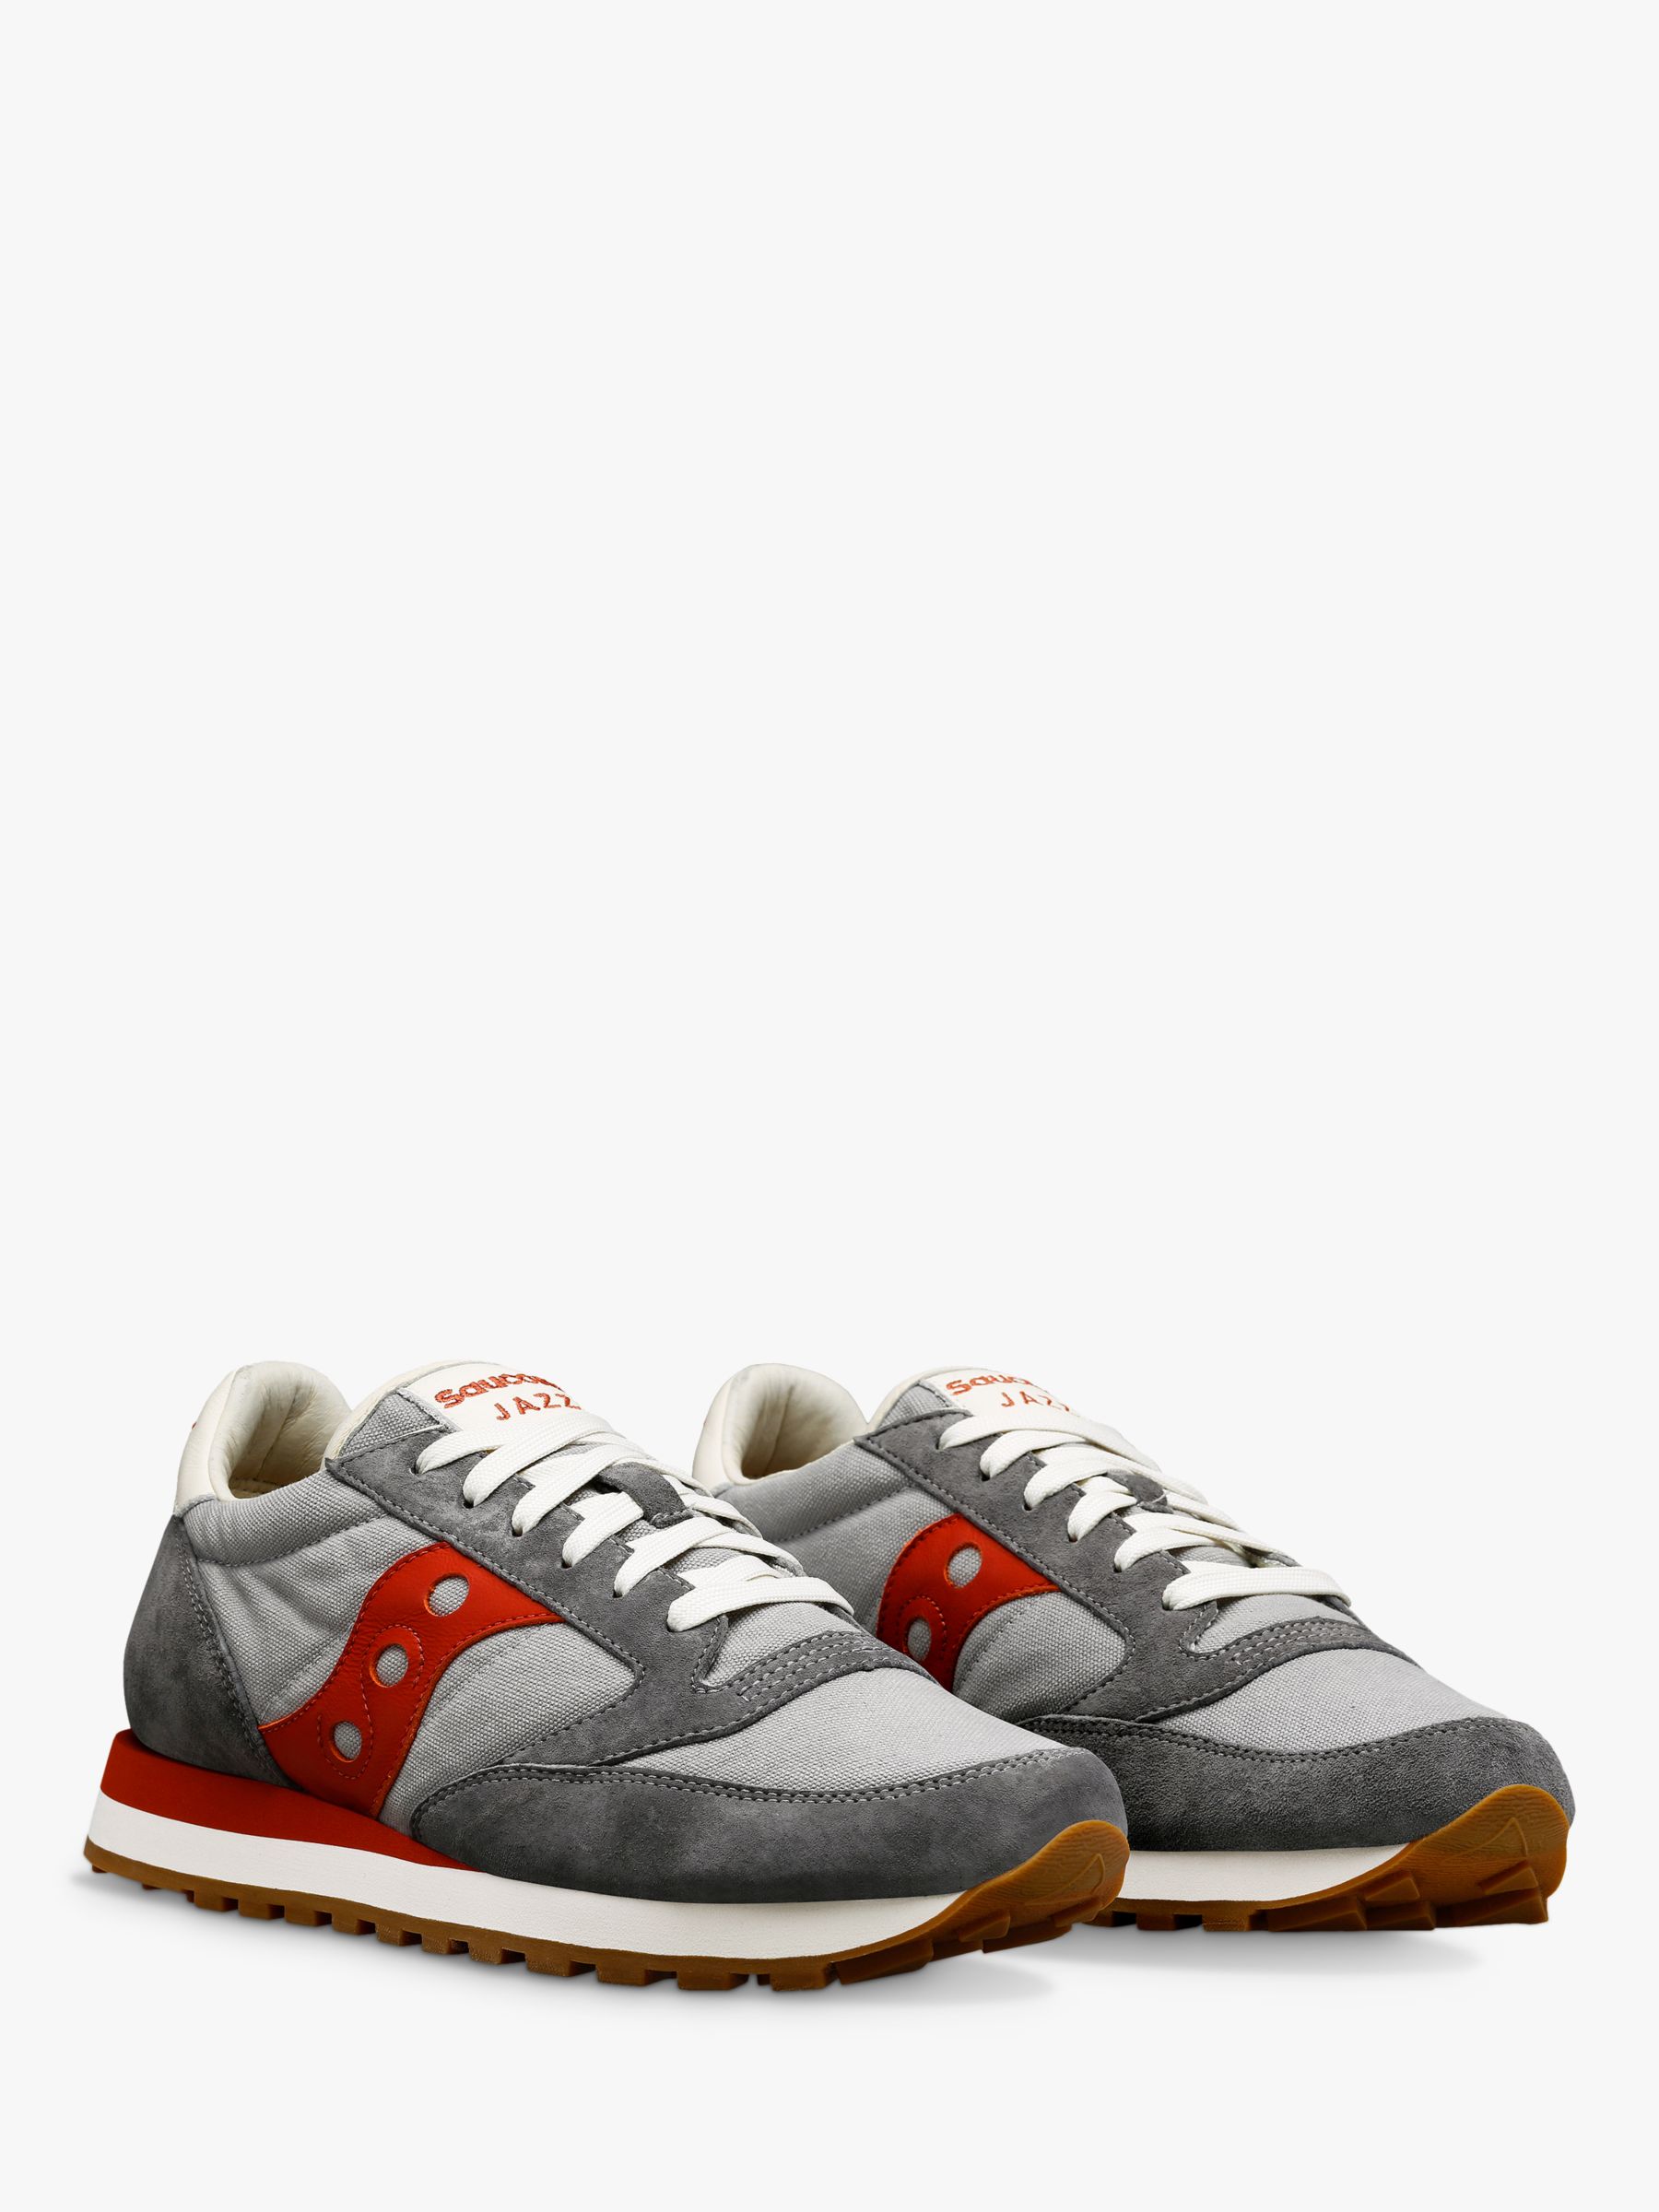 Saucony Jazz Original Lace Up Trainers, Grey/Red, 11